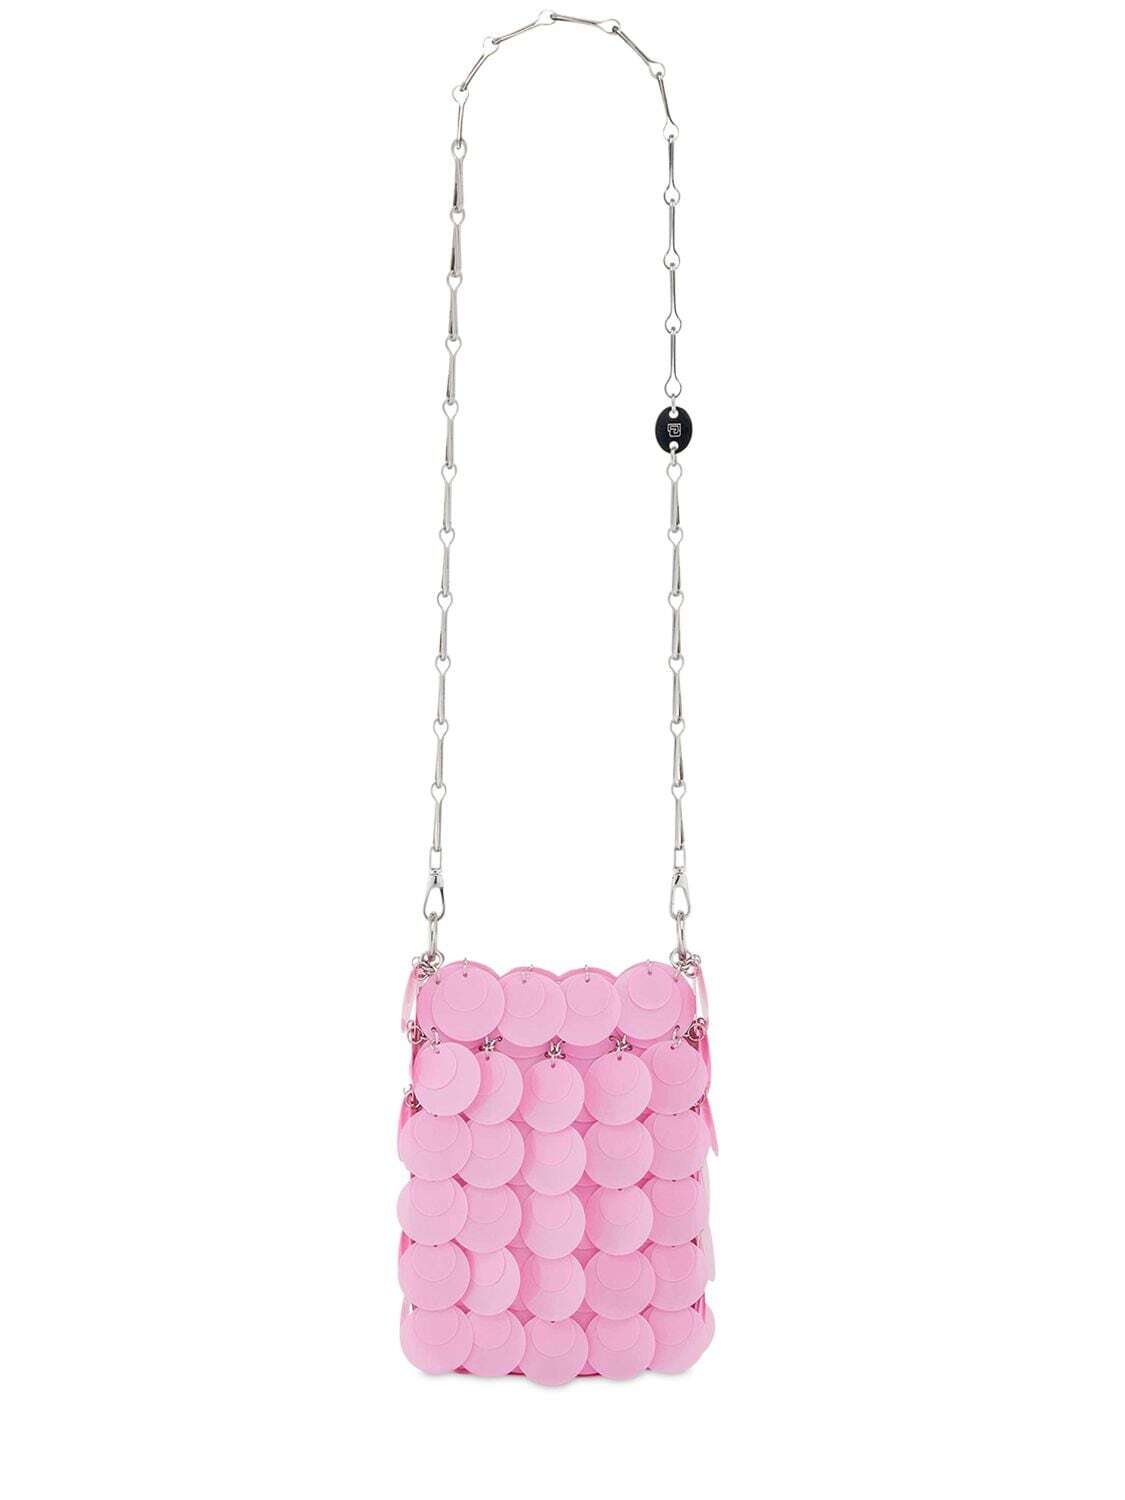 PACO RABANNE Mini Sparkle Oversize Sequined Bag in pink